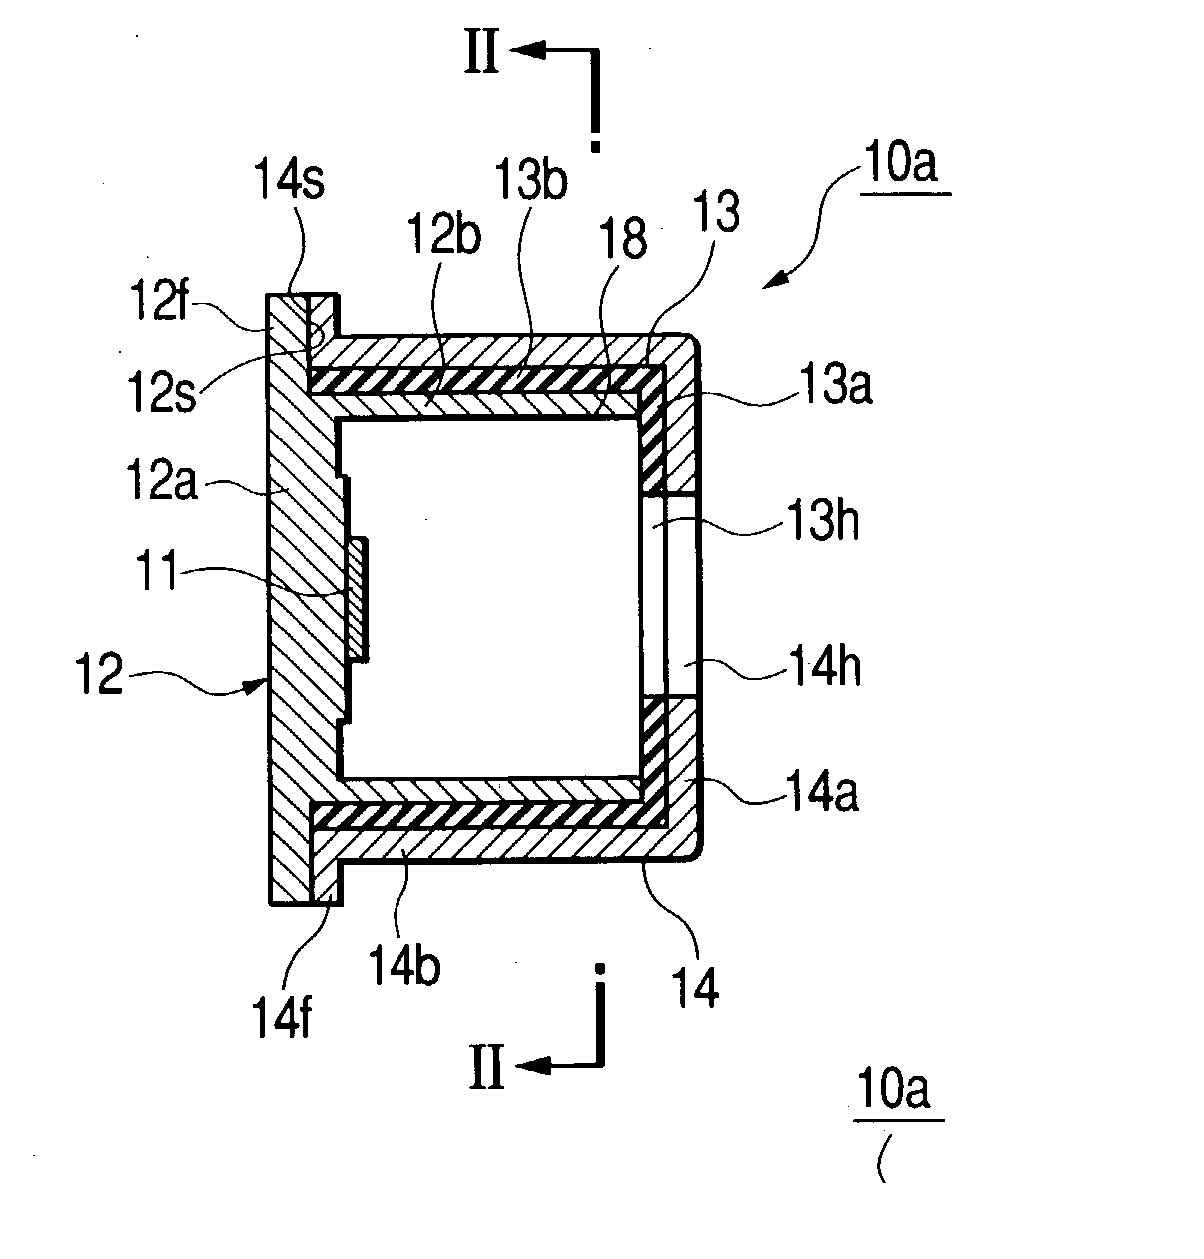 Ultrasonic transceiver and ultrasonic clearance sonar using the same